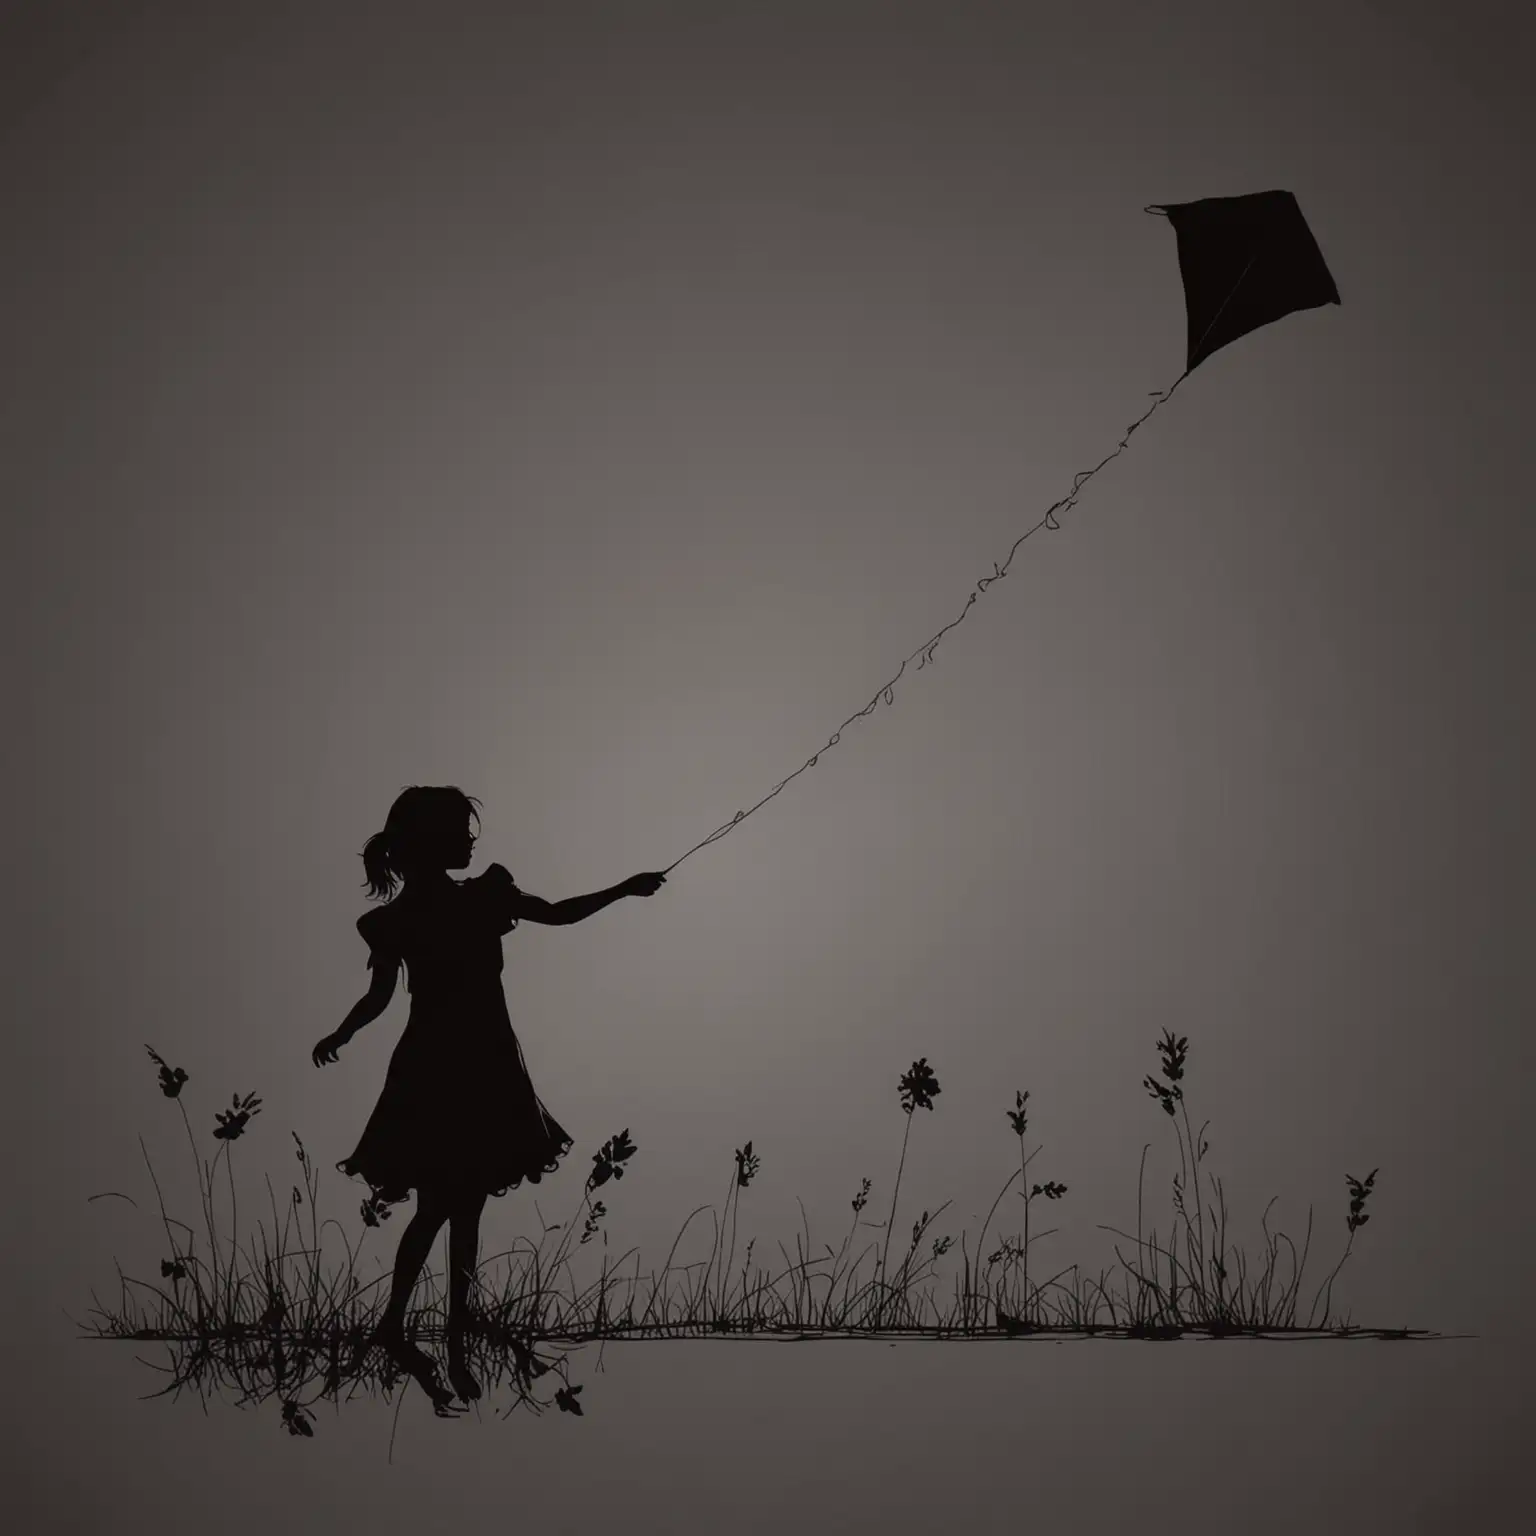 Silhouette of a Girl in a Flowing Dress Holding a Kite at Sunset